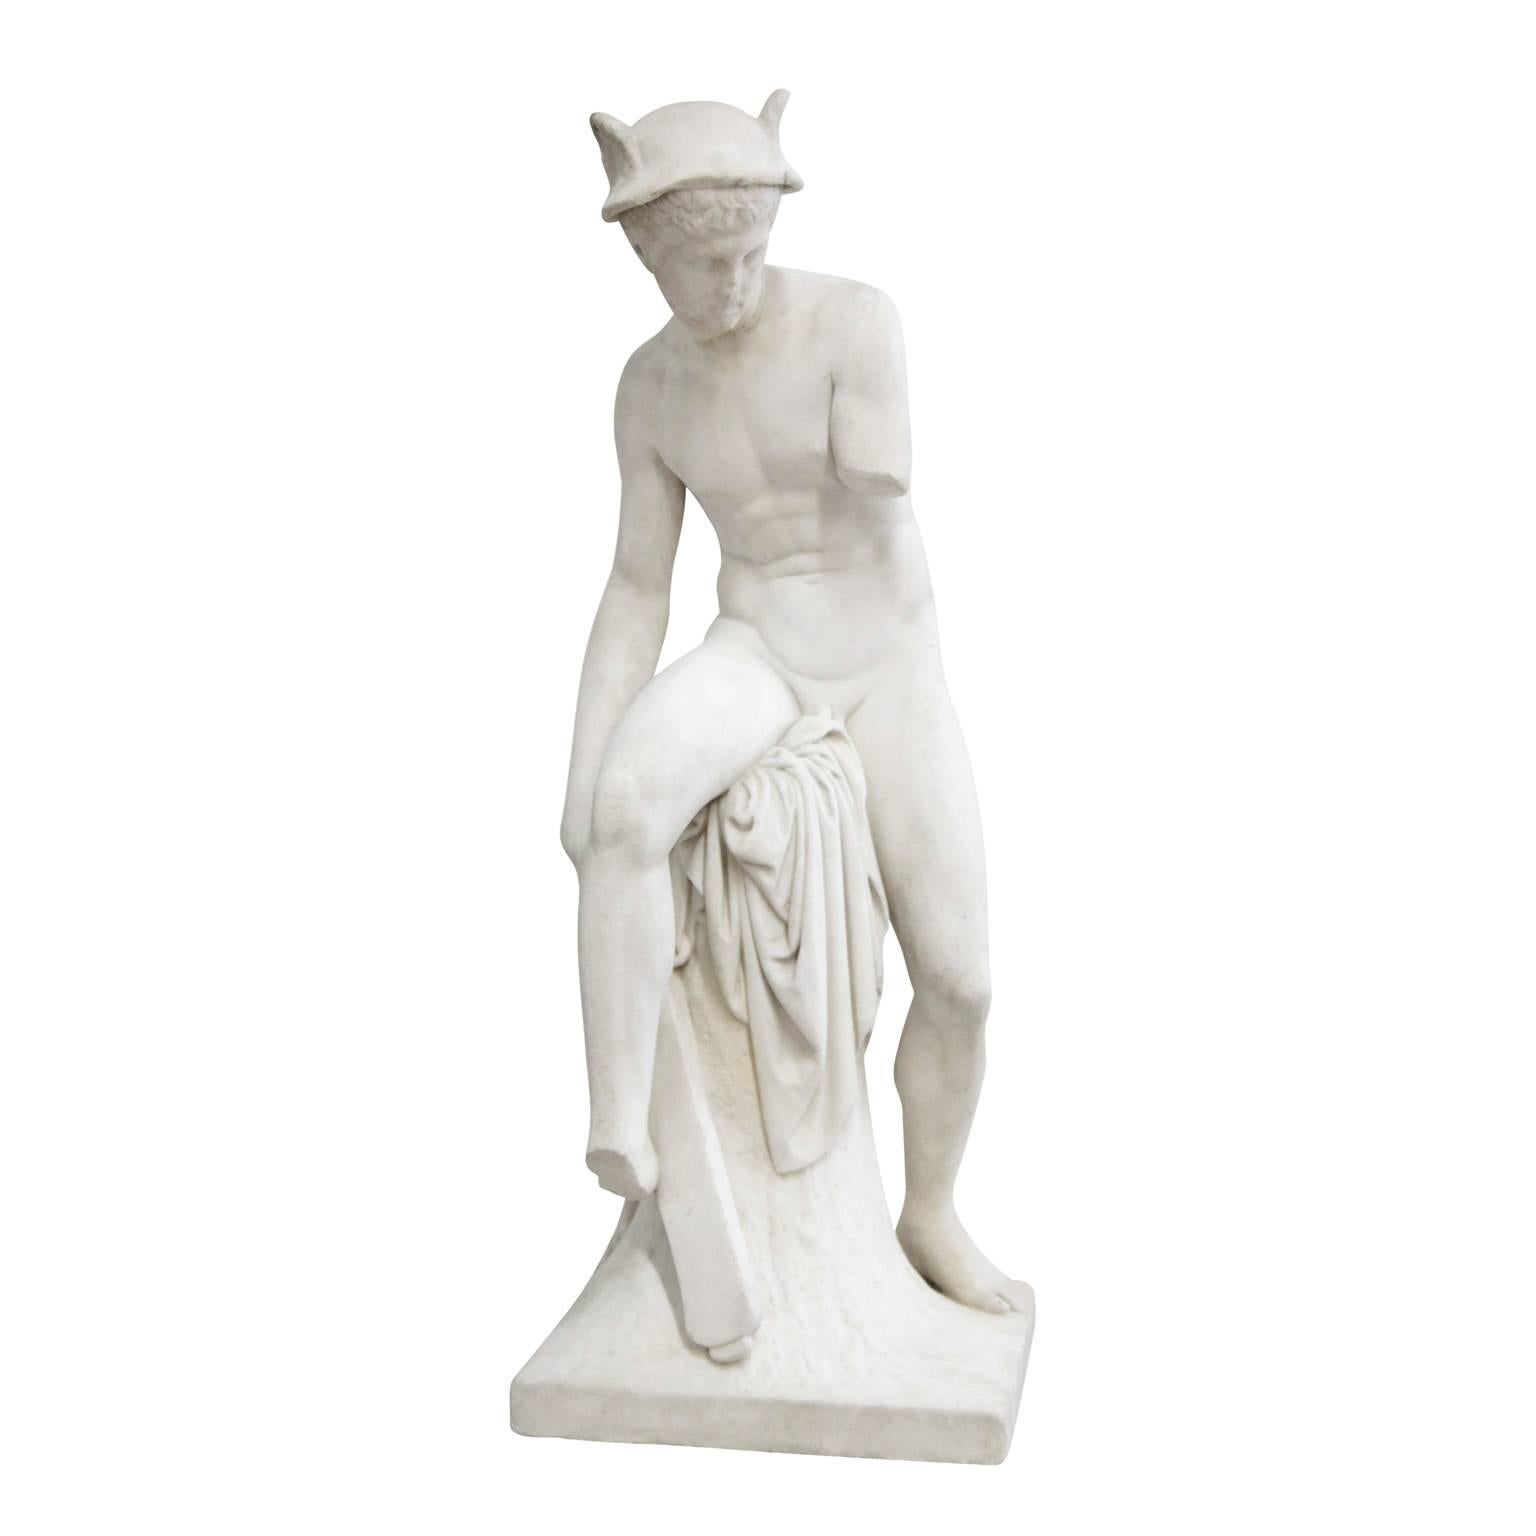 Marble Hermes Statue from the Early 19th Century